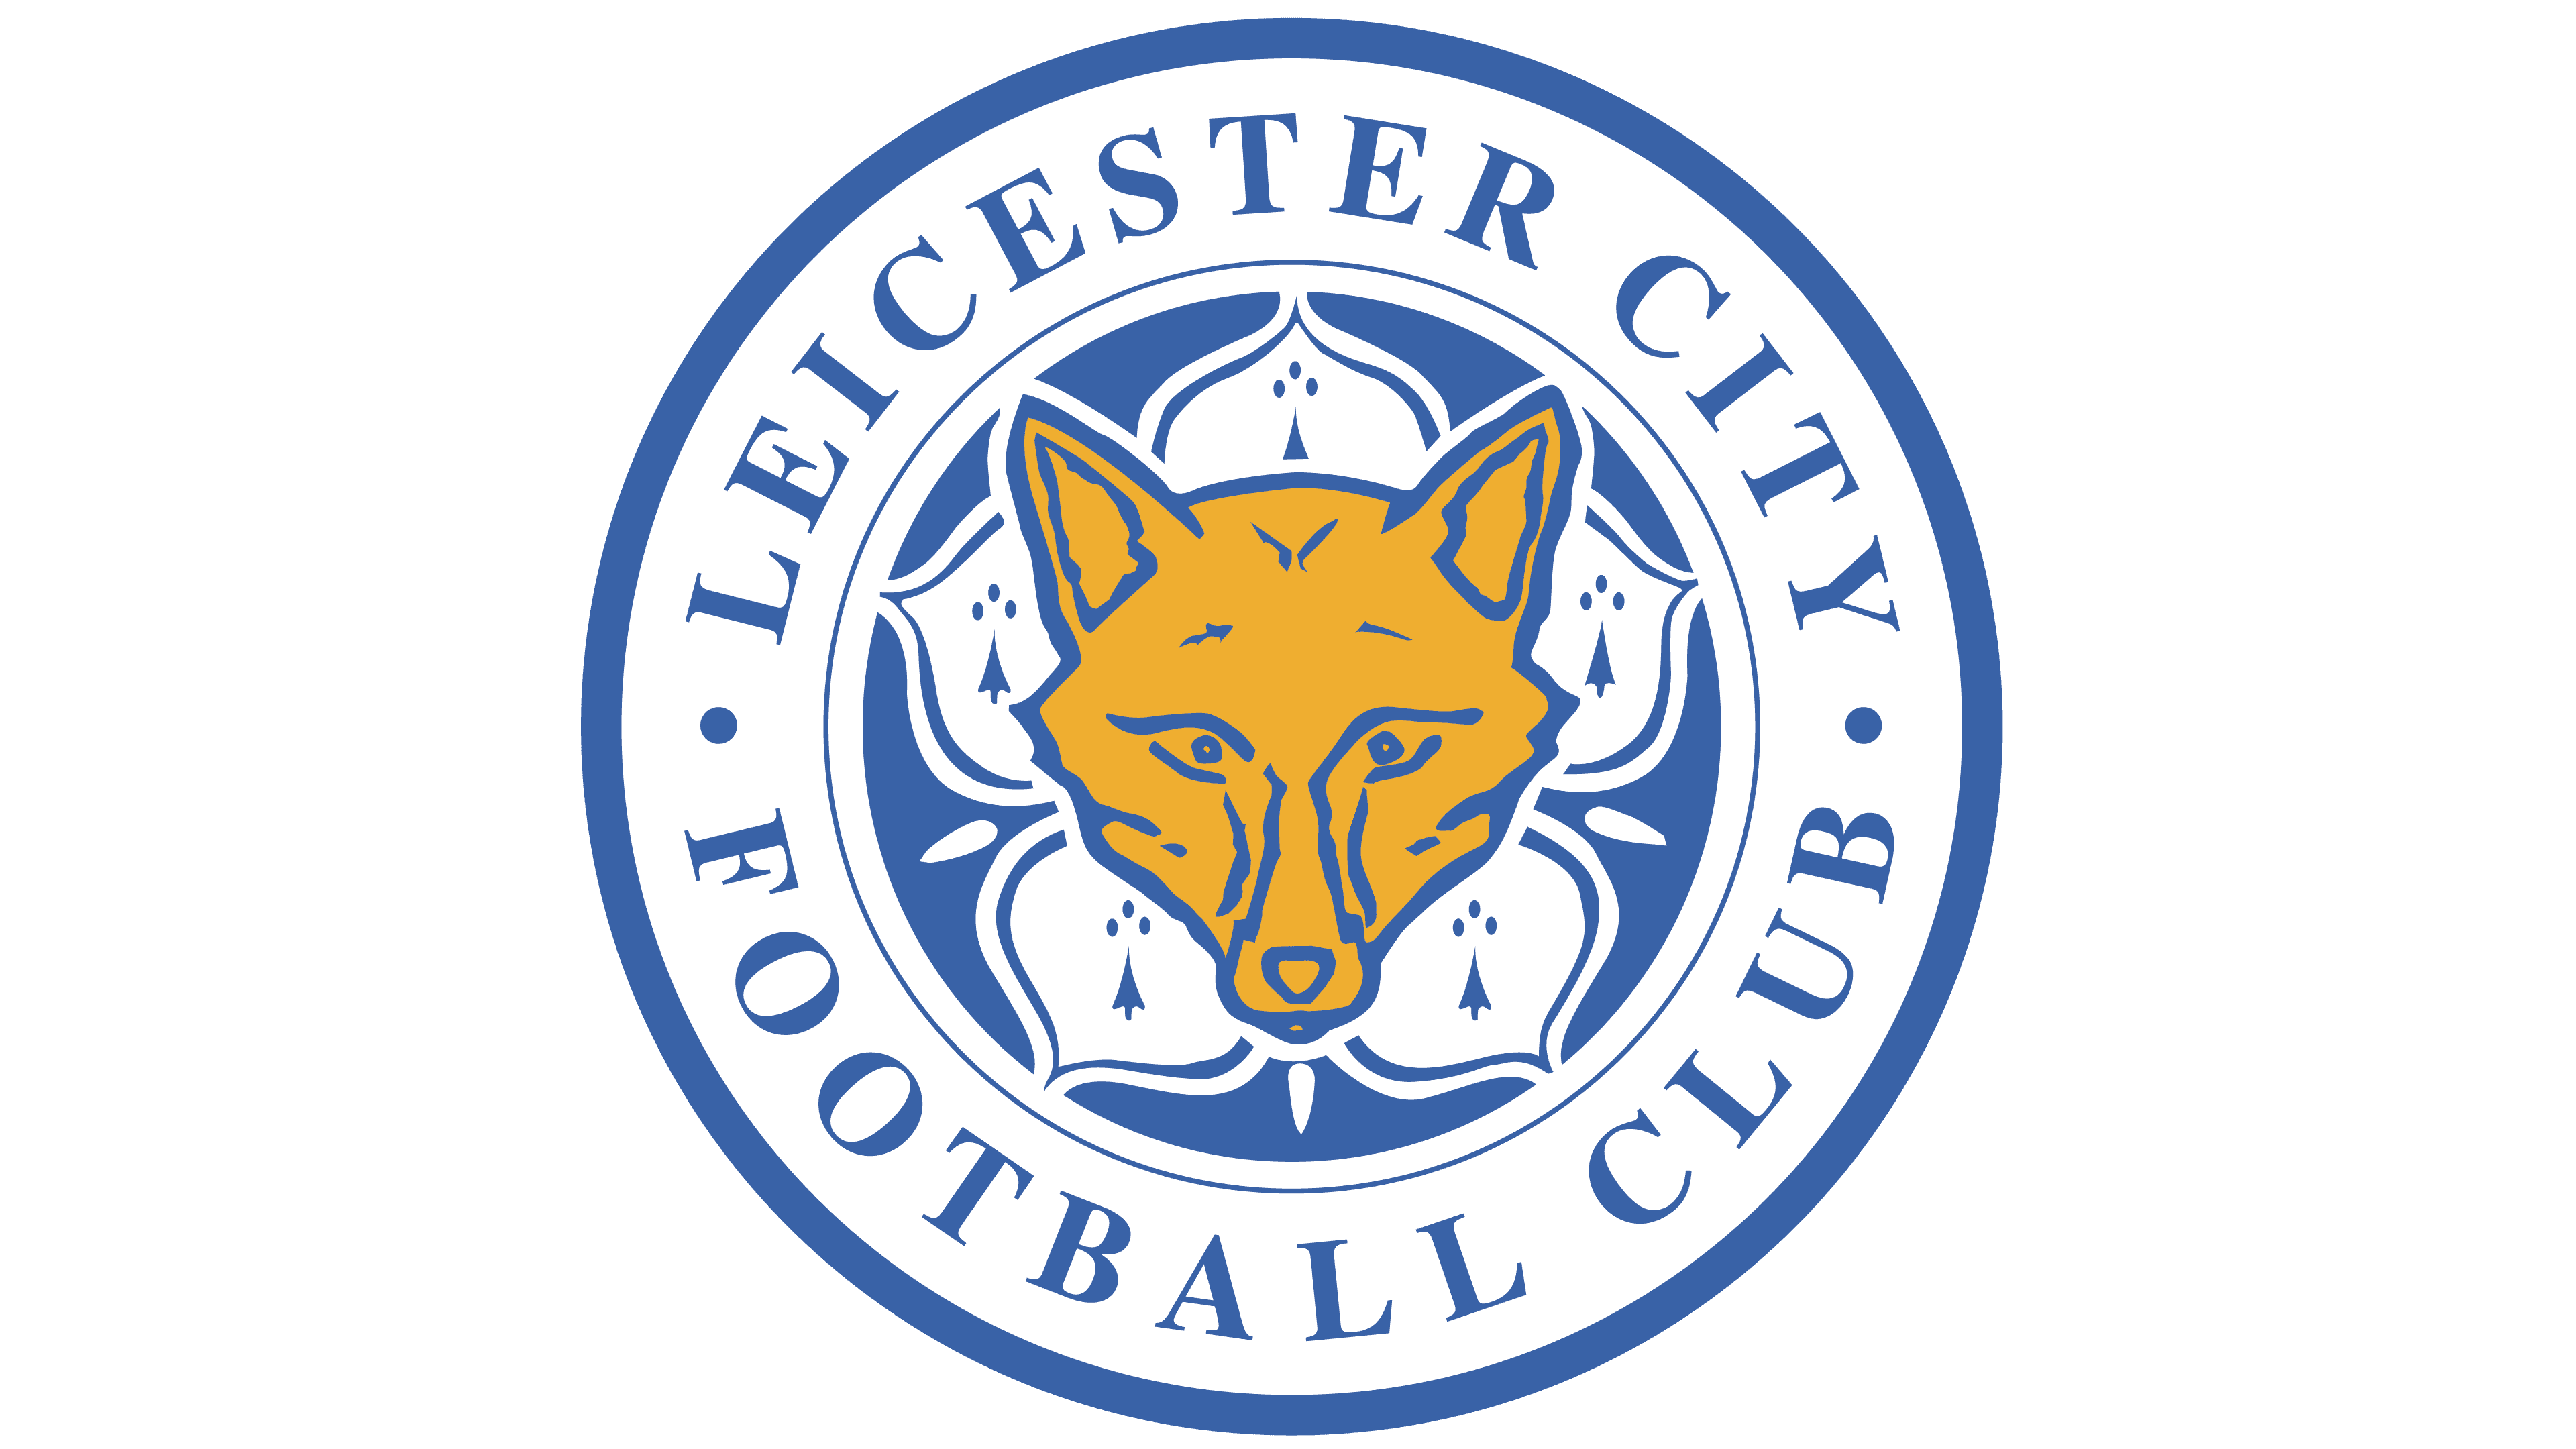 Leicester-City-football-club-logo.png